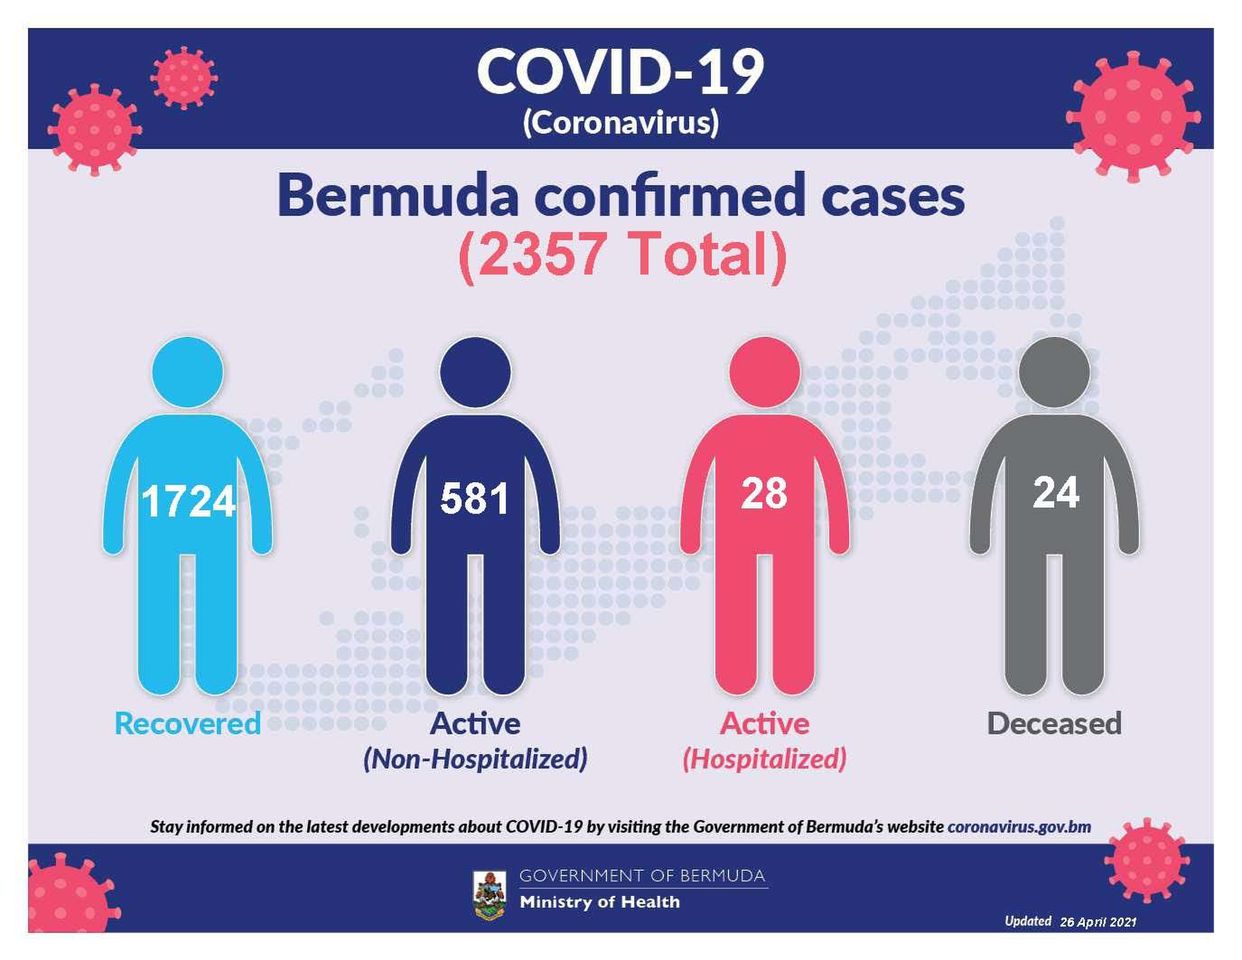 1 new COVID-19 death and 22 new cases reported in Bermuda, 26 April